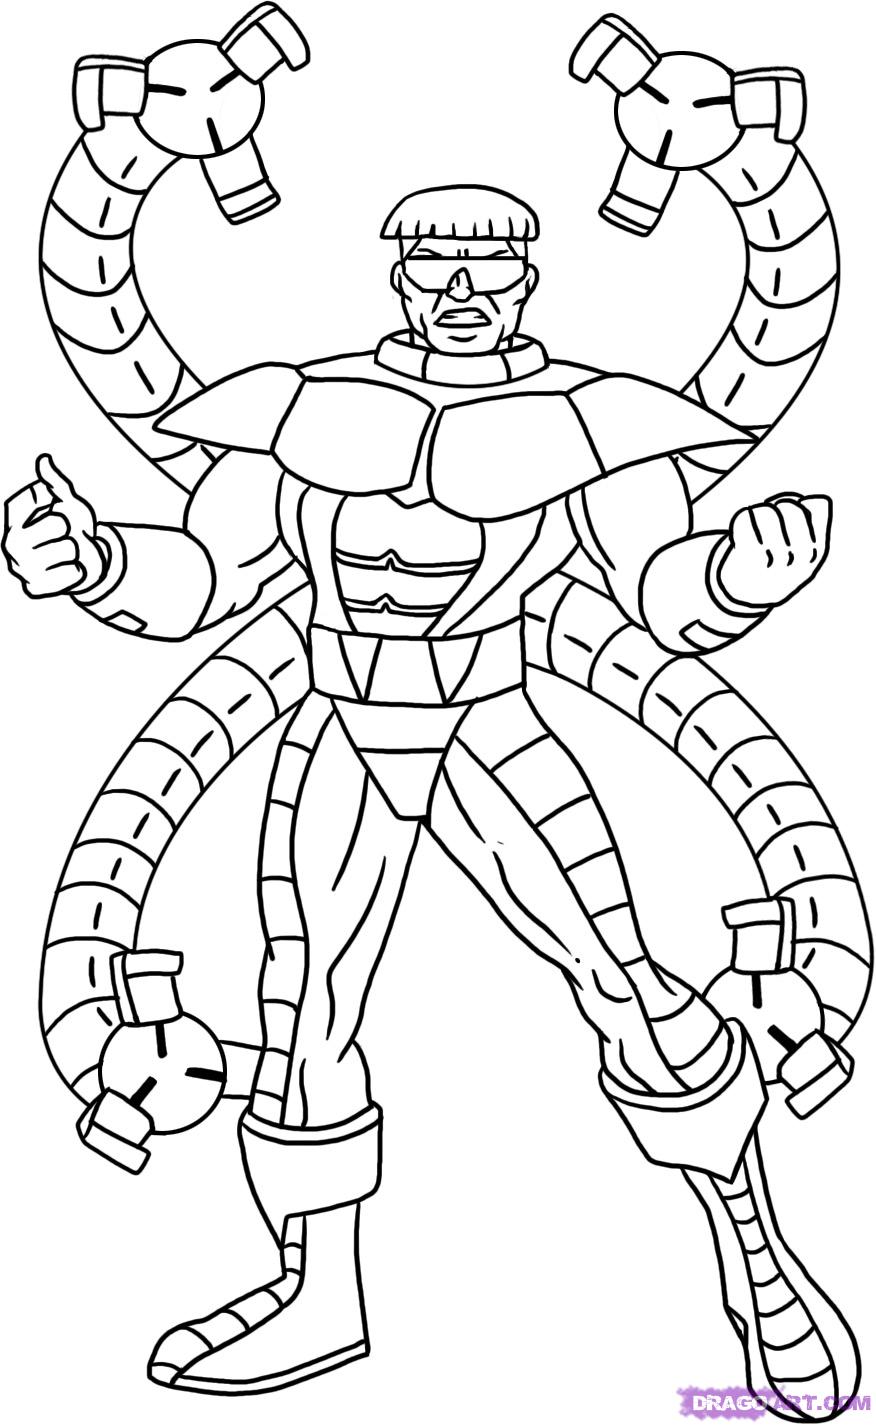 Doctor Octopus Coloring Pages - GetColoringPages.com